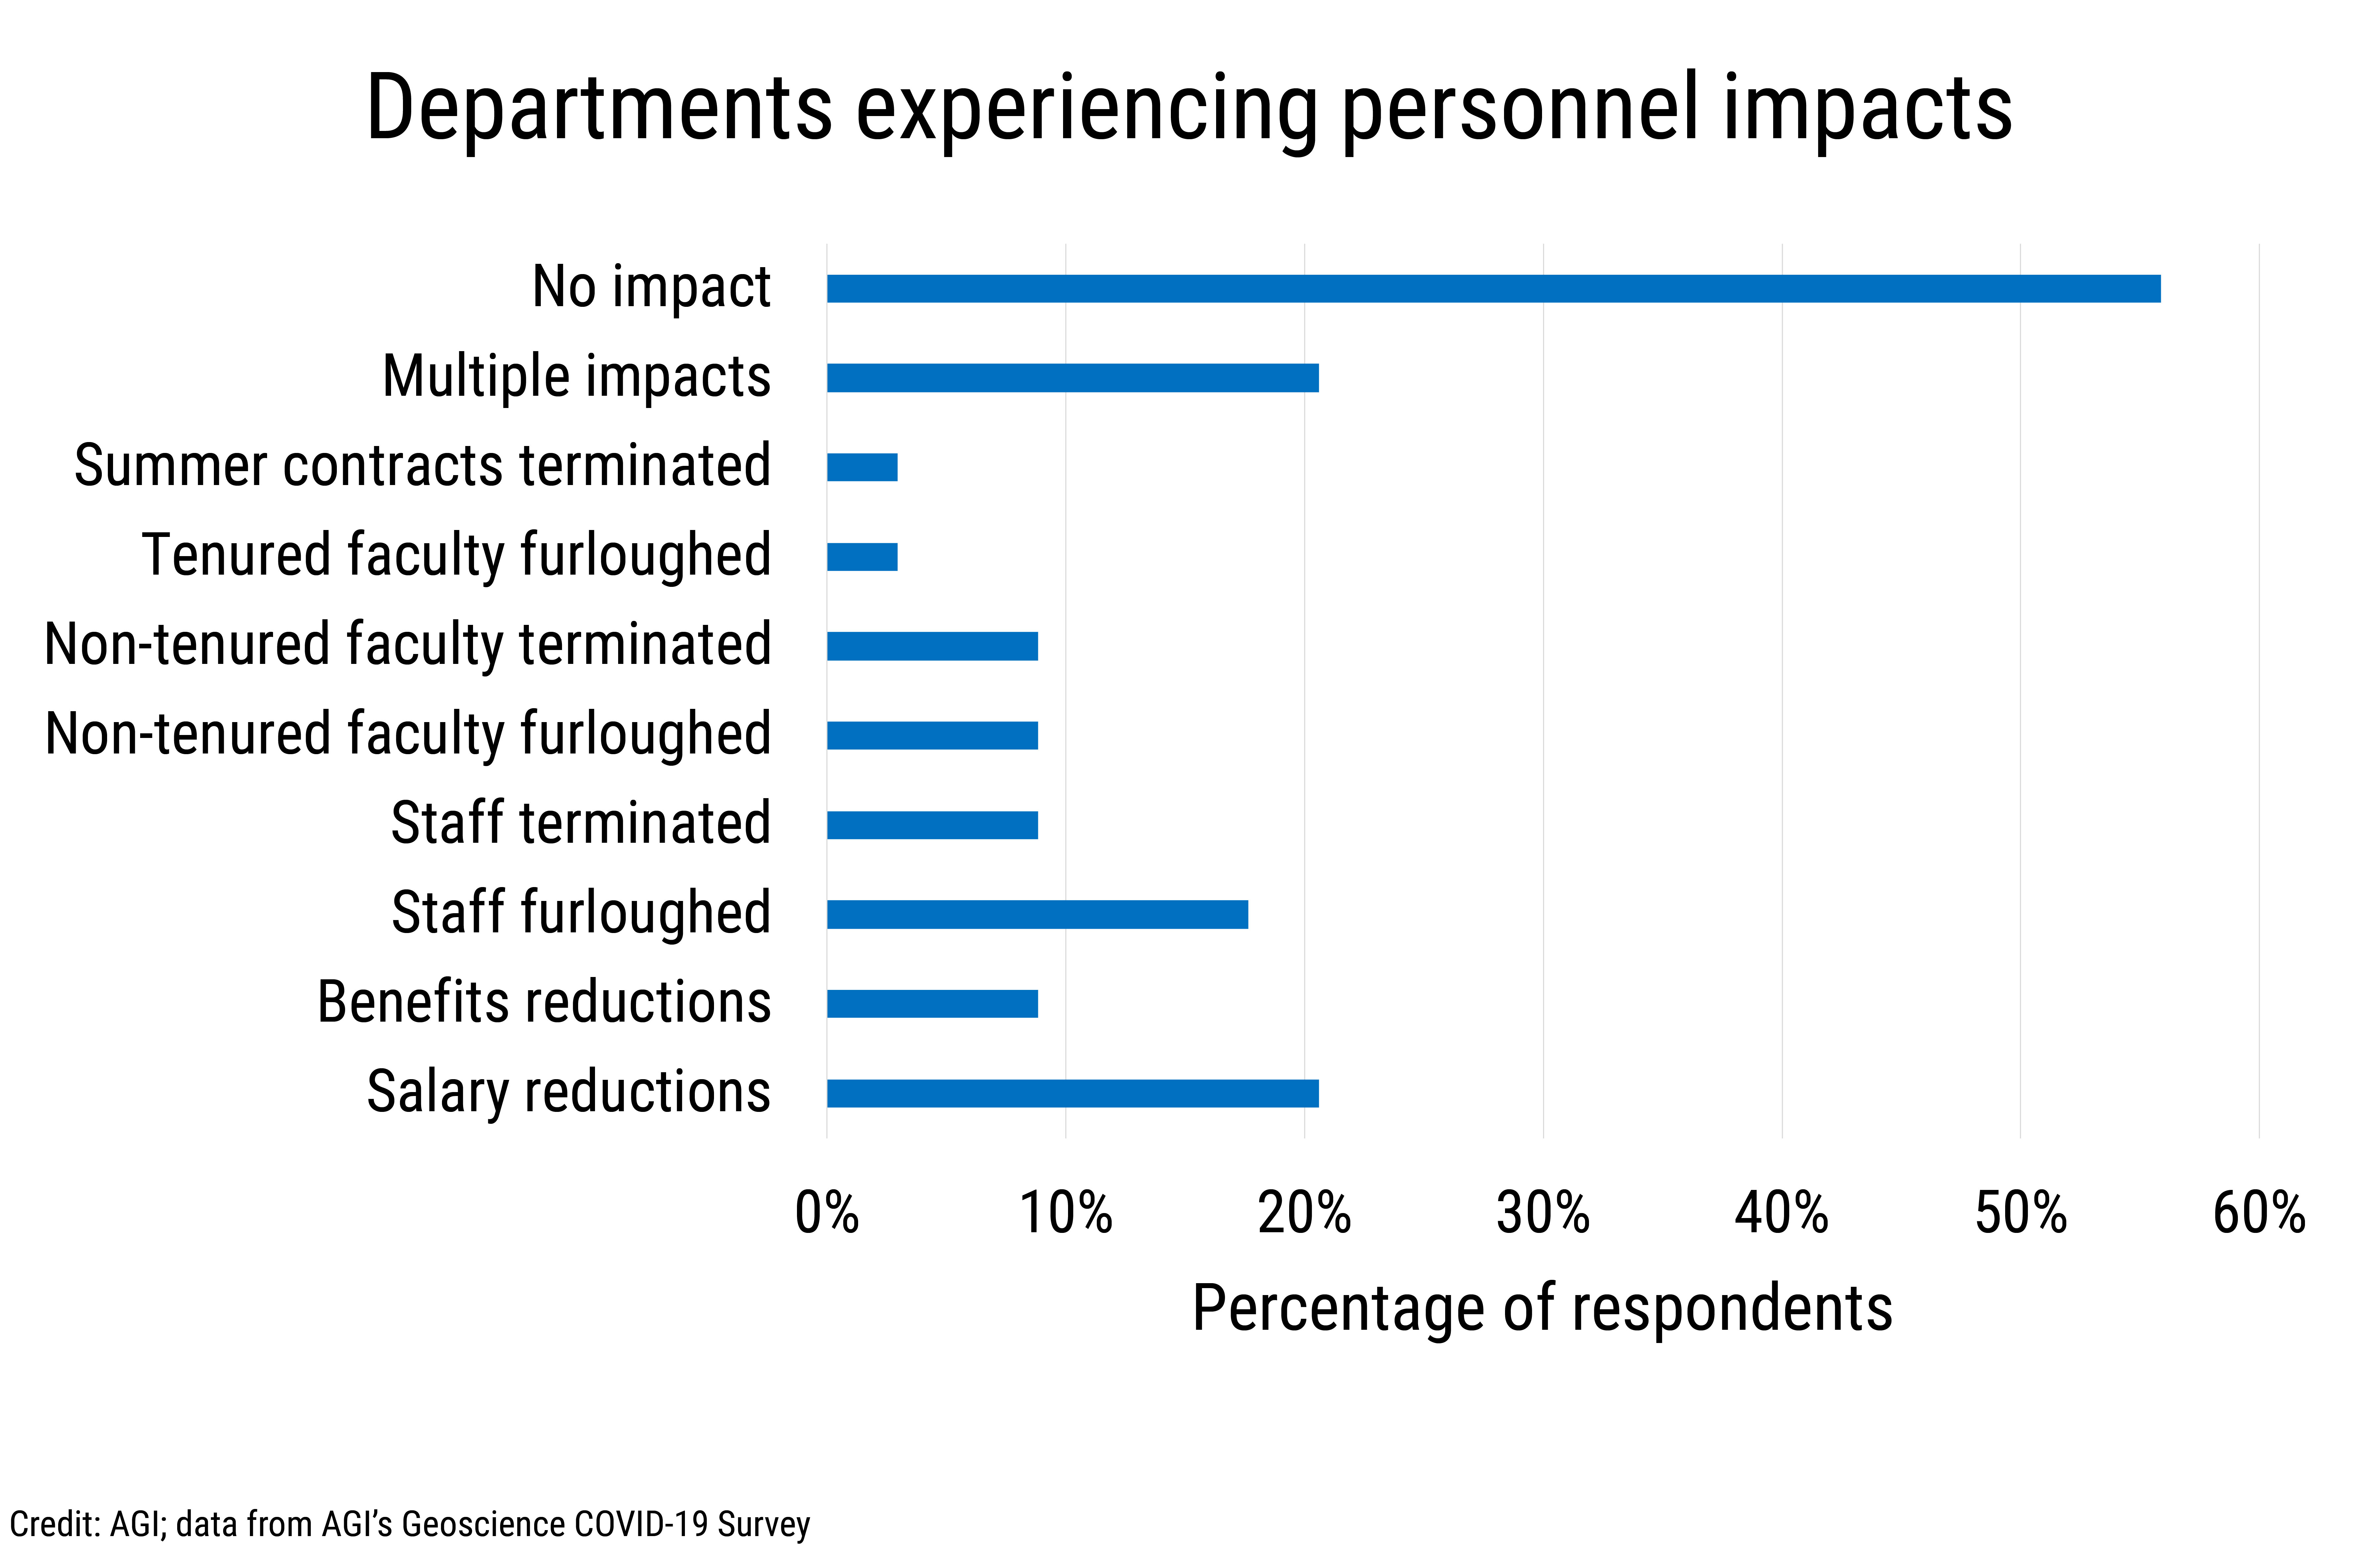 Data Brief 2020-007 chart 02: Departments experience personel impacts (credit: AGI)